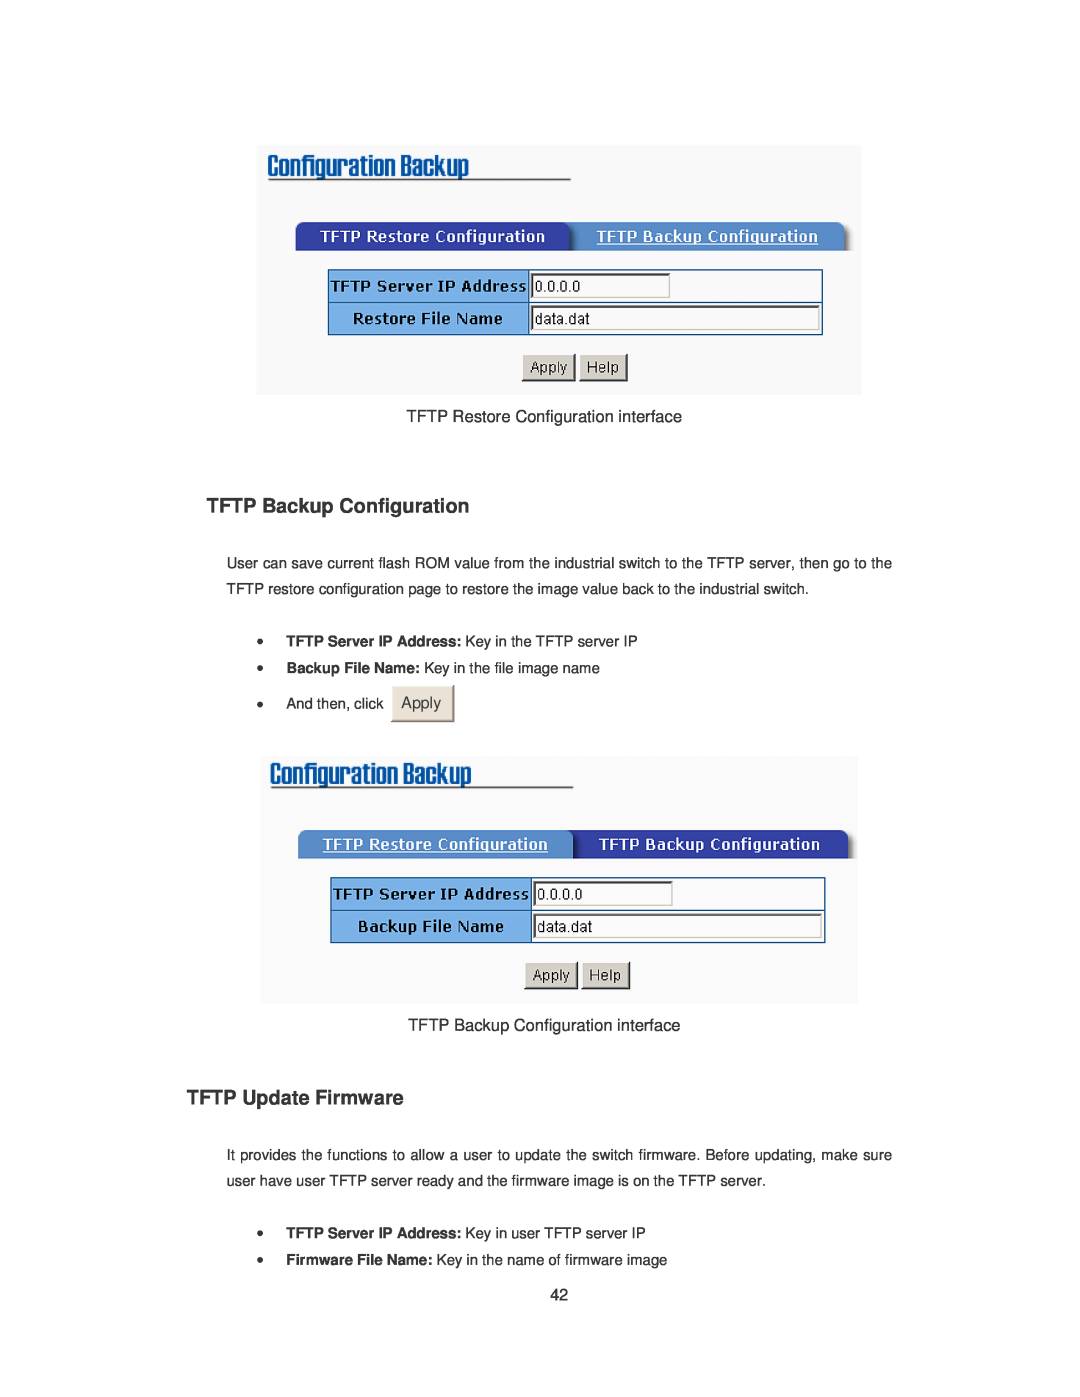 Transition Networks SISTM10XX-162-LR TFTP Backup Configuration, TFTP Update Firmware, TFTP Restore Configuration interface 